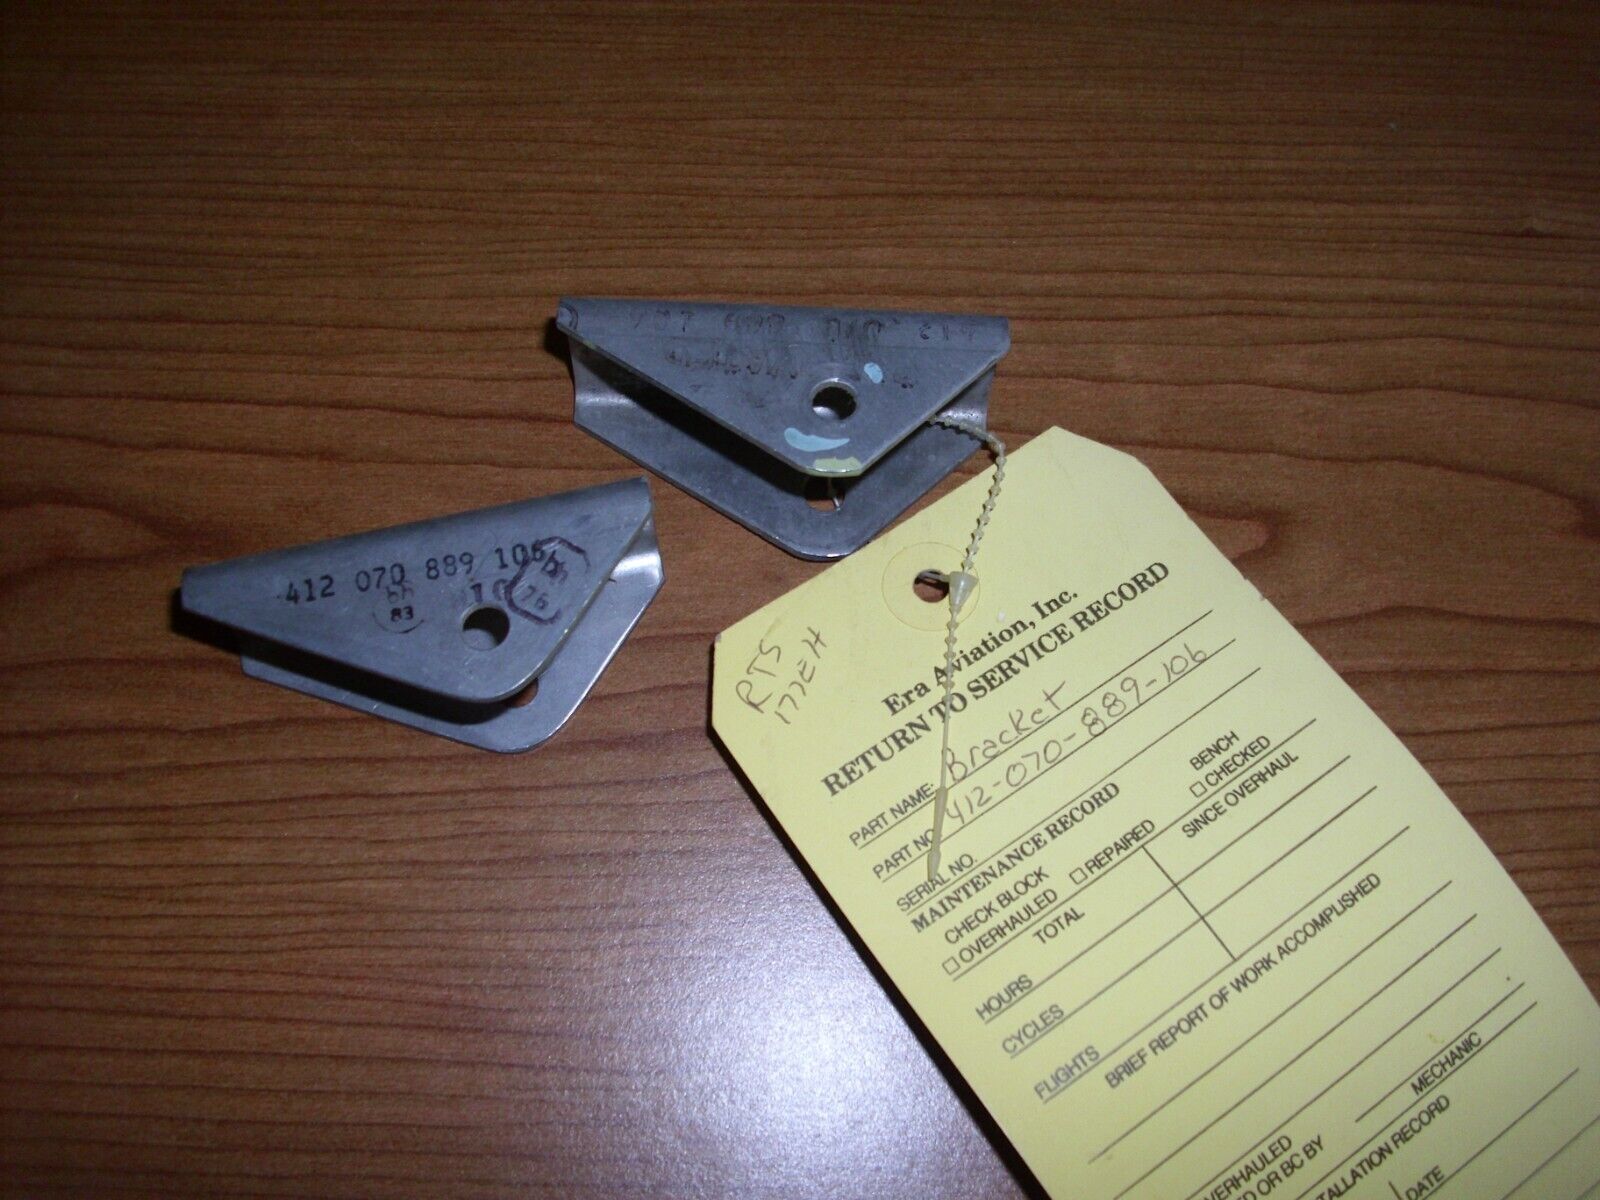 Bell 412 Helicopter Brackets 412-070-889-106